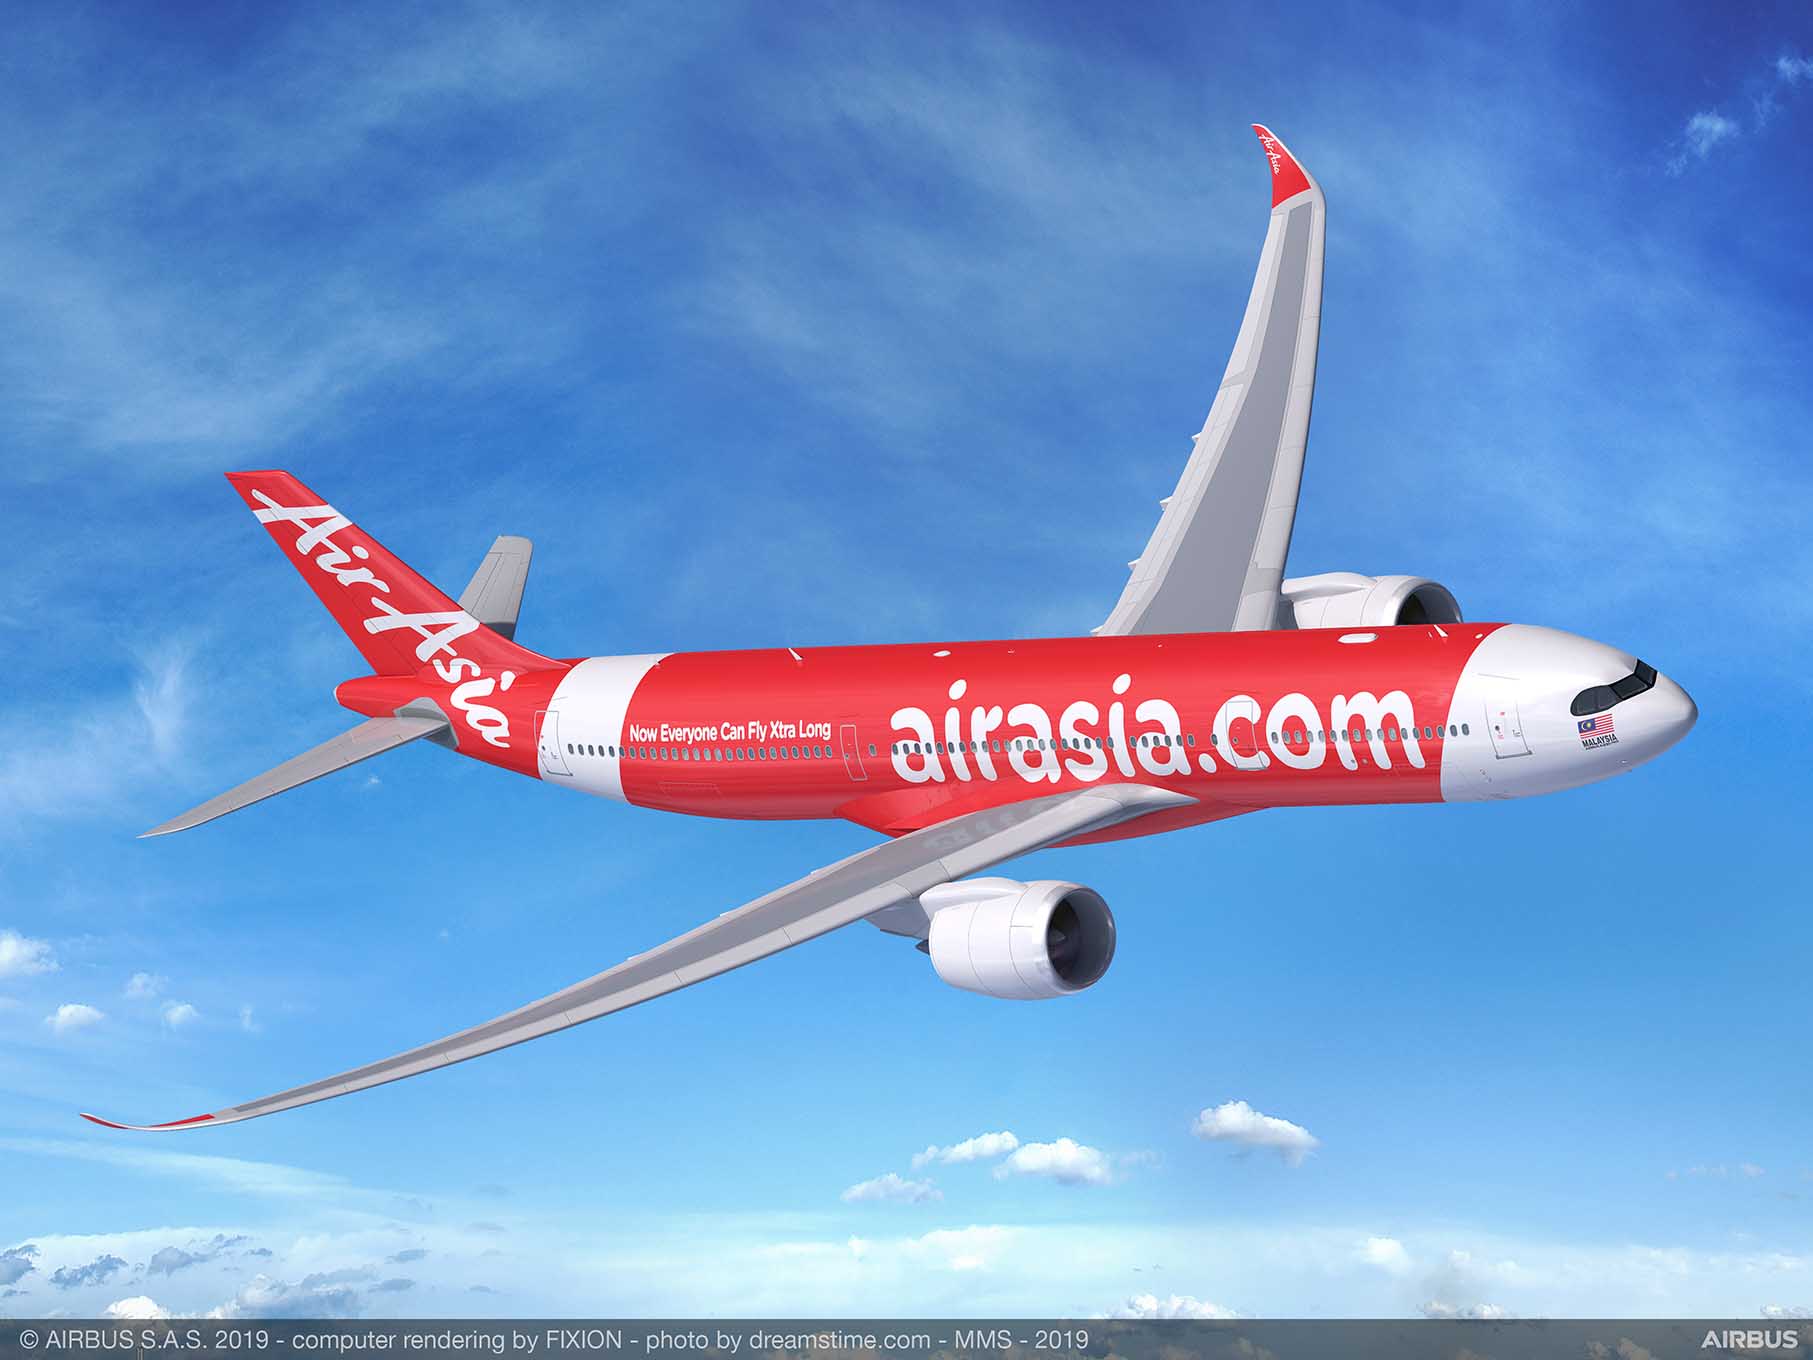 Indonesia AirAsia reshuffles board with new CEO appointment